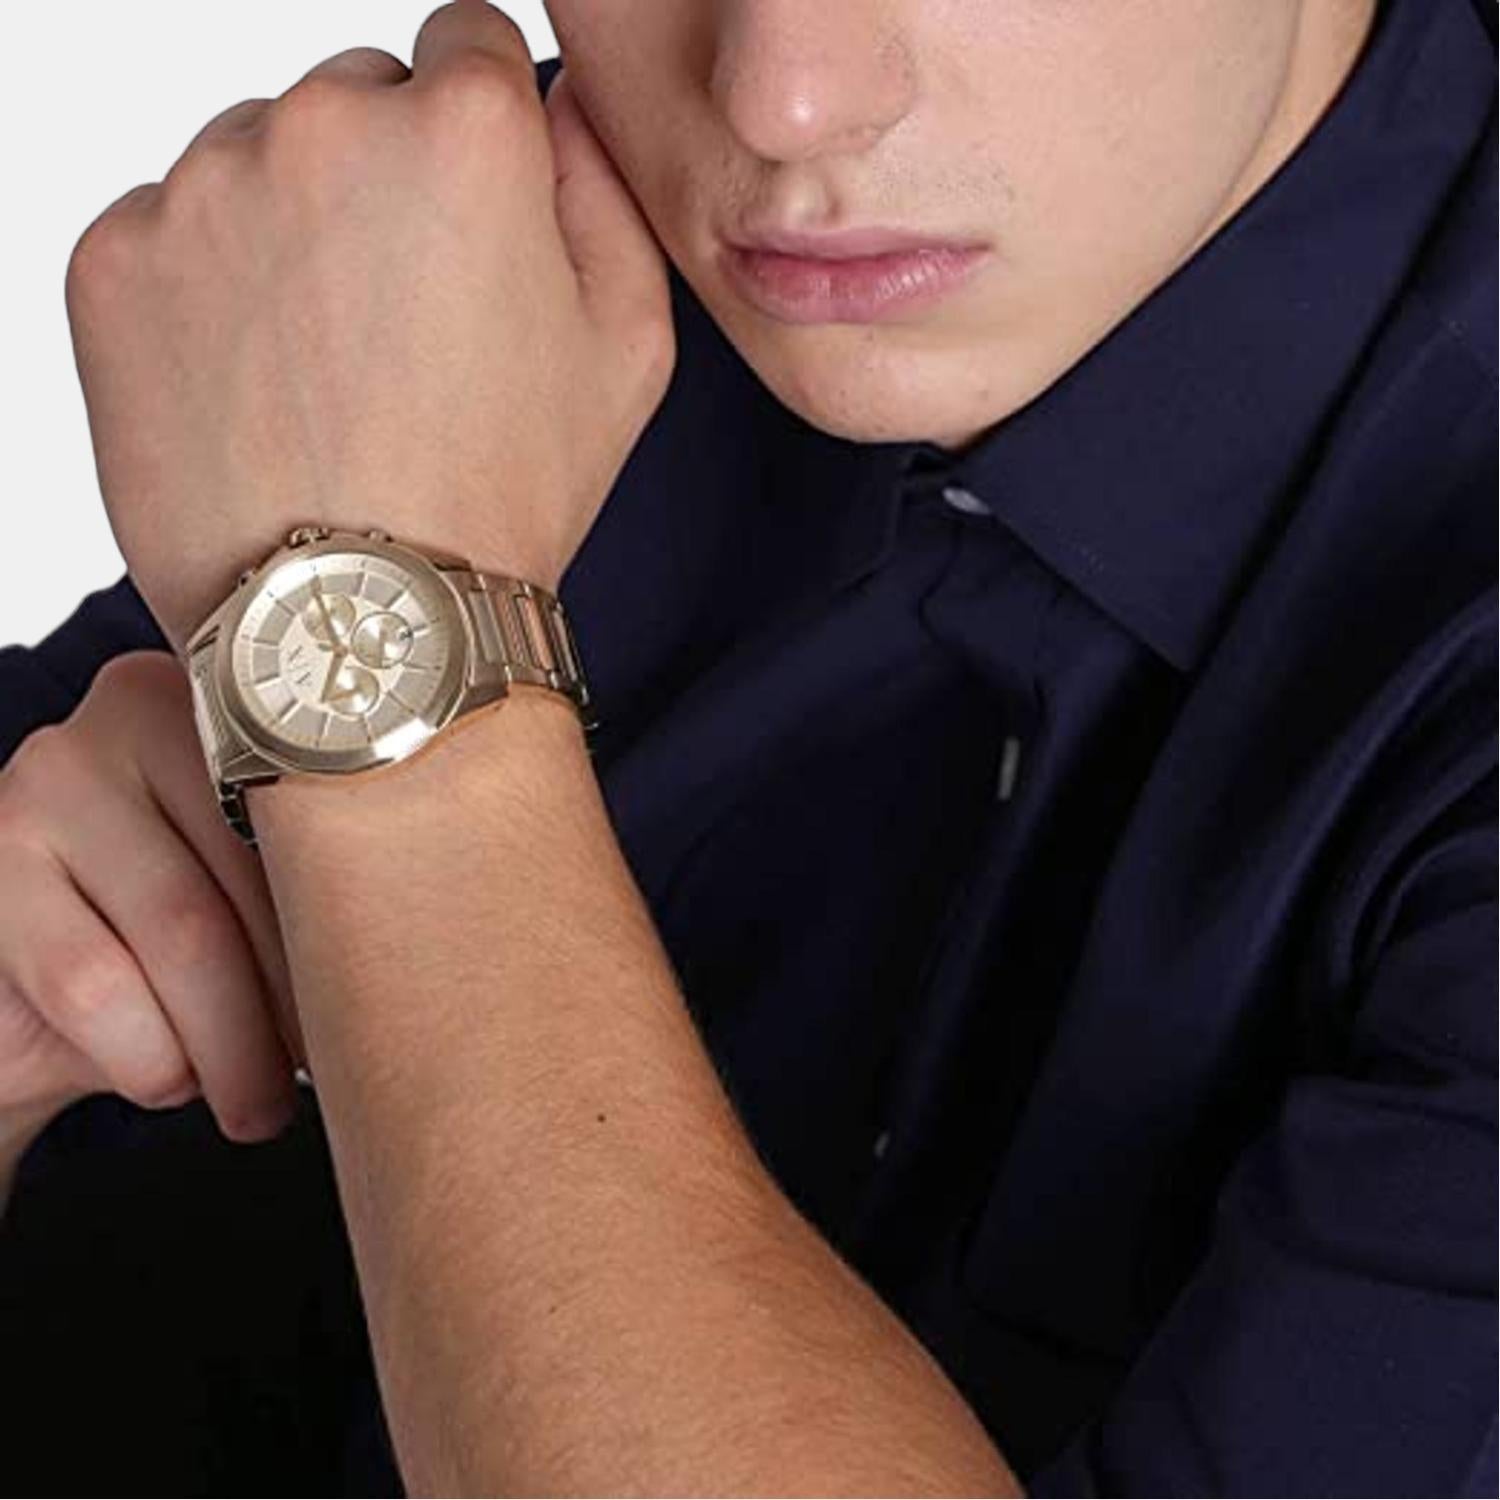 Armani Exchange Male Gold Quartz | Exchange Watch Just In Armani Chronograph – Time Stainless Steel